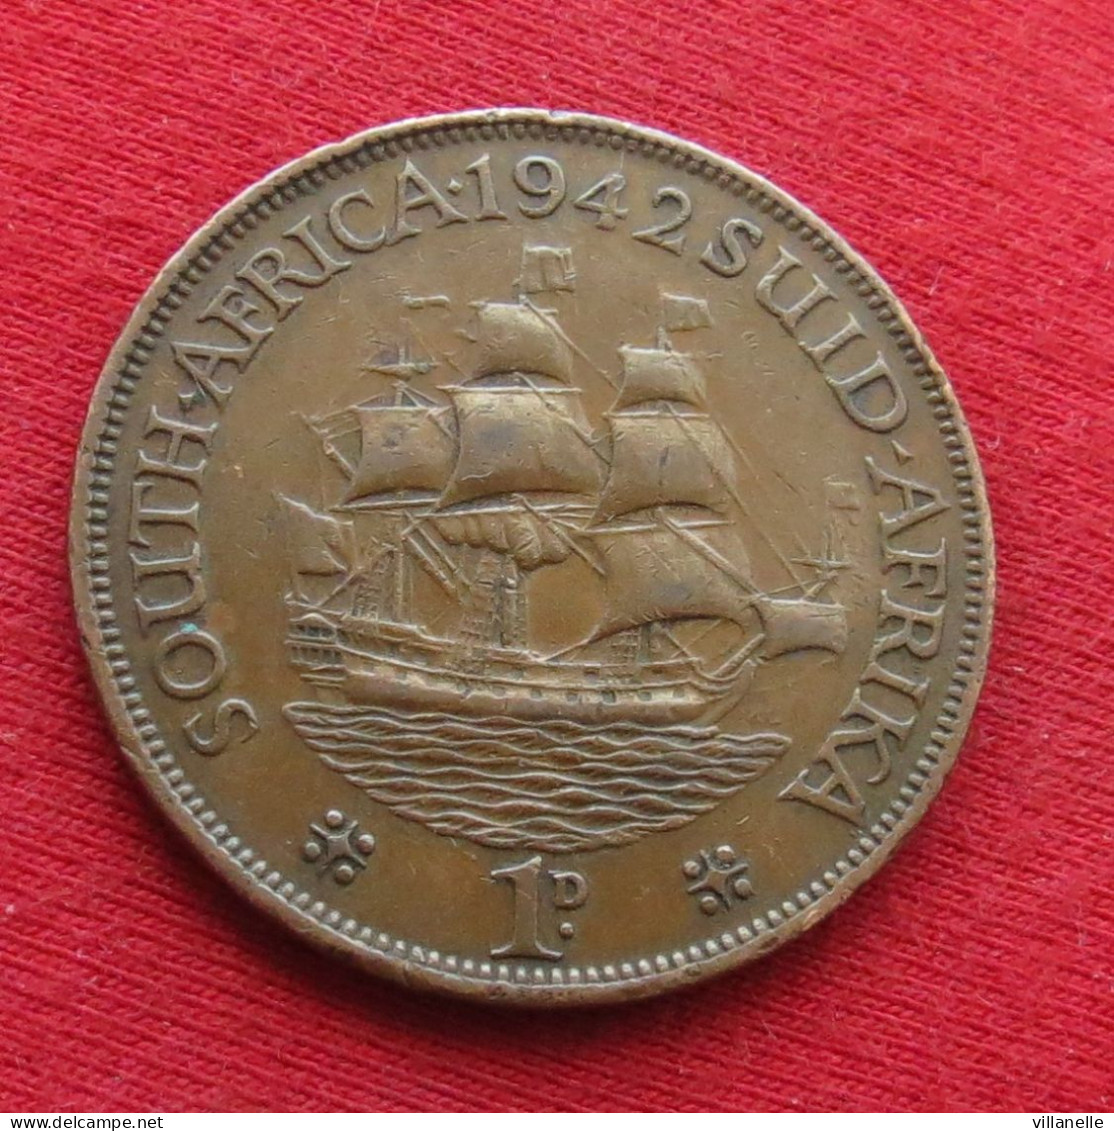 South Africa 1 Penny 1942 Without Star After Date   Africa Do Sul RSA Afrique Do Sud Afrika  #0 W ºº - South Africa